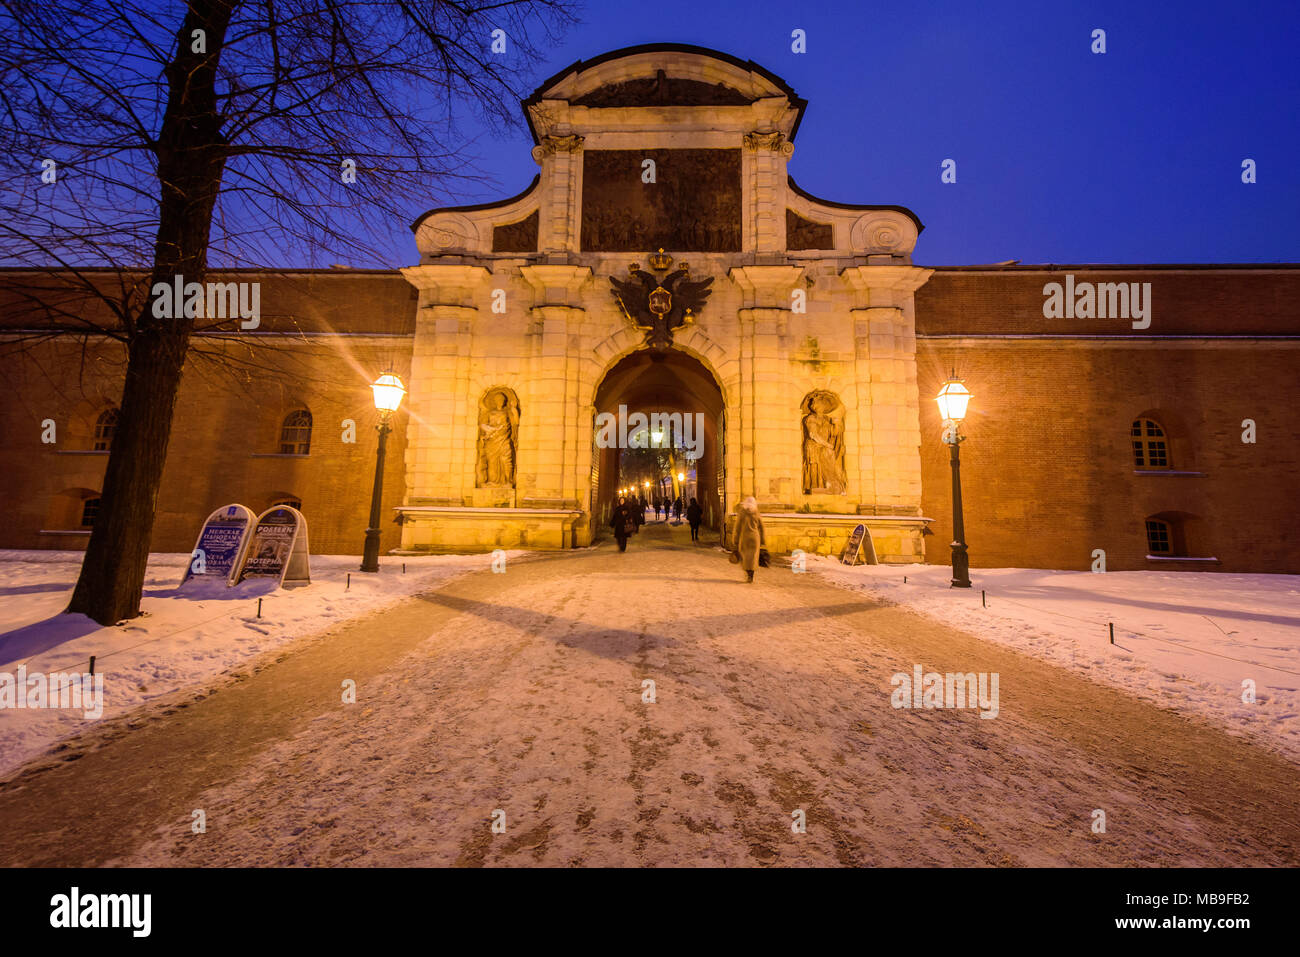 St. Petersburg, Main Entrance of Peter and Paul Fortress at night Stock Photo